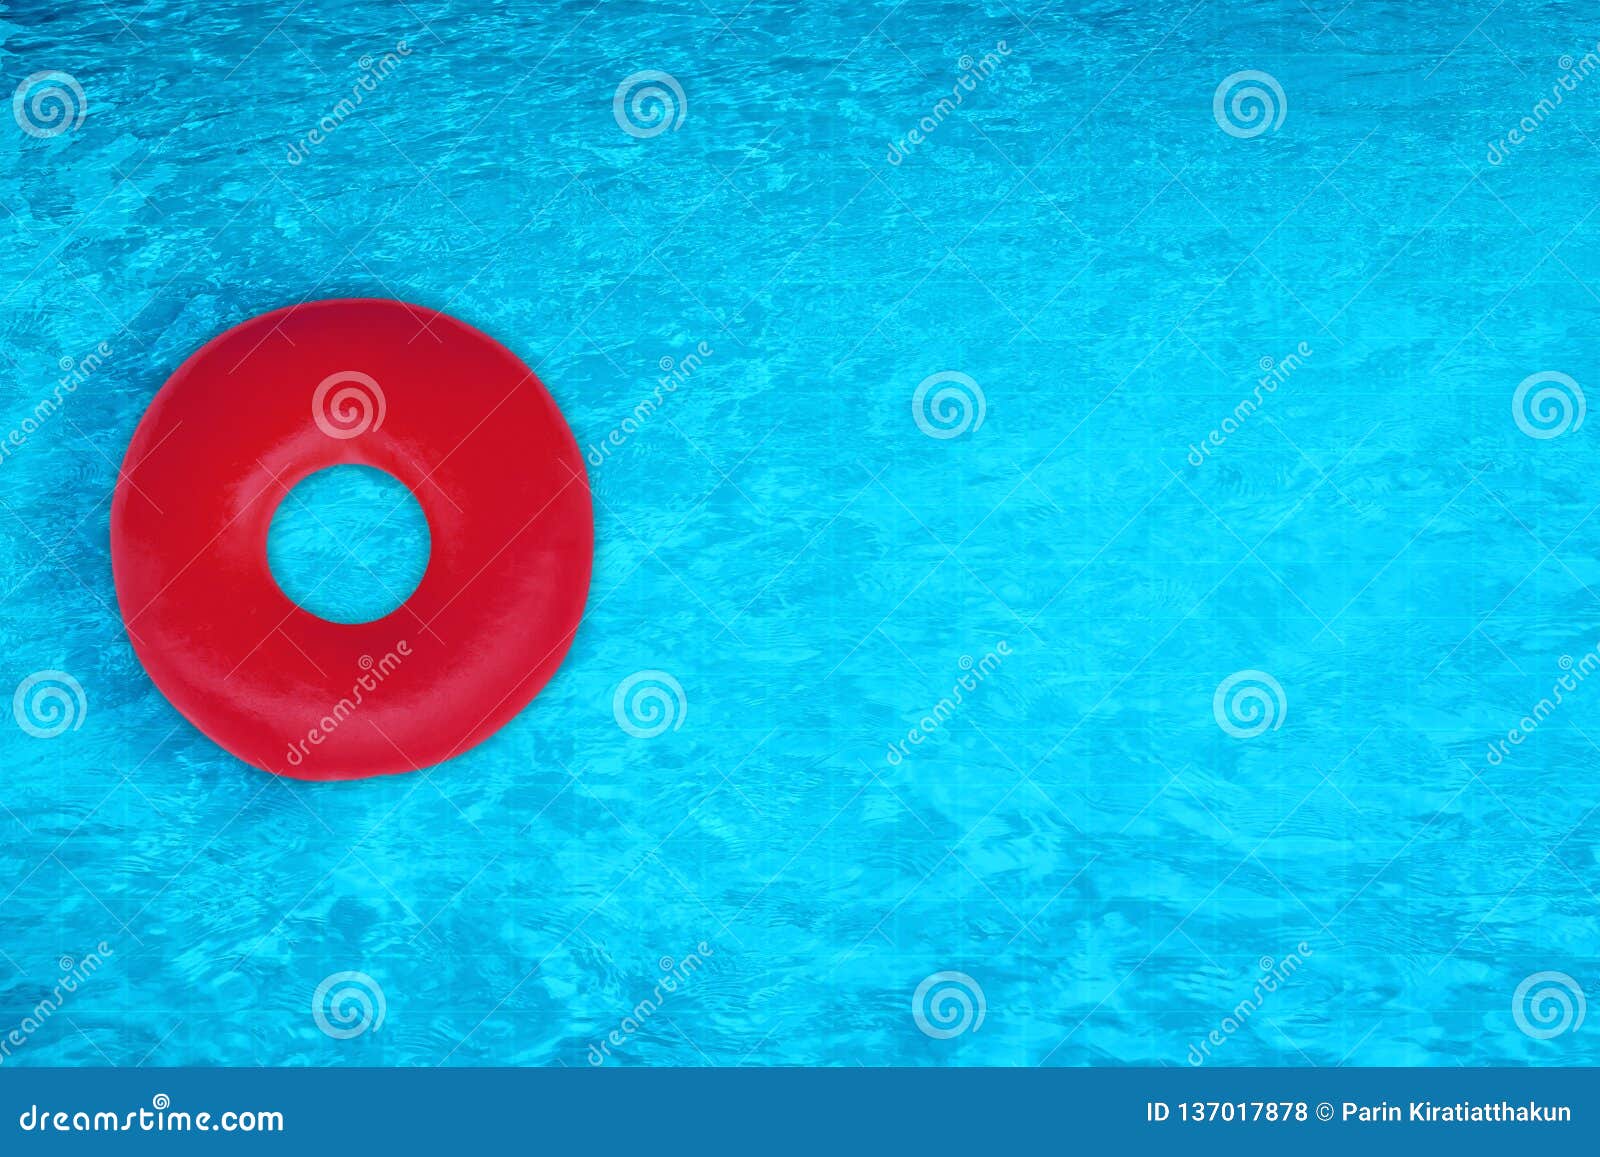 Inflatable Ring Swimming in Pool Background Stock Photo - Image of ...